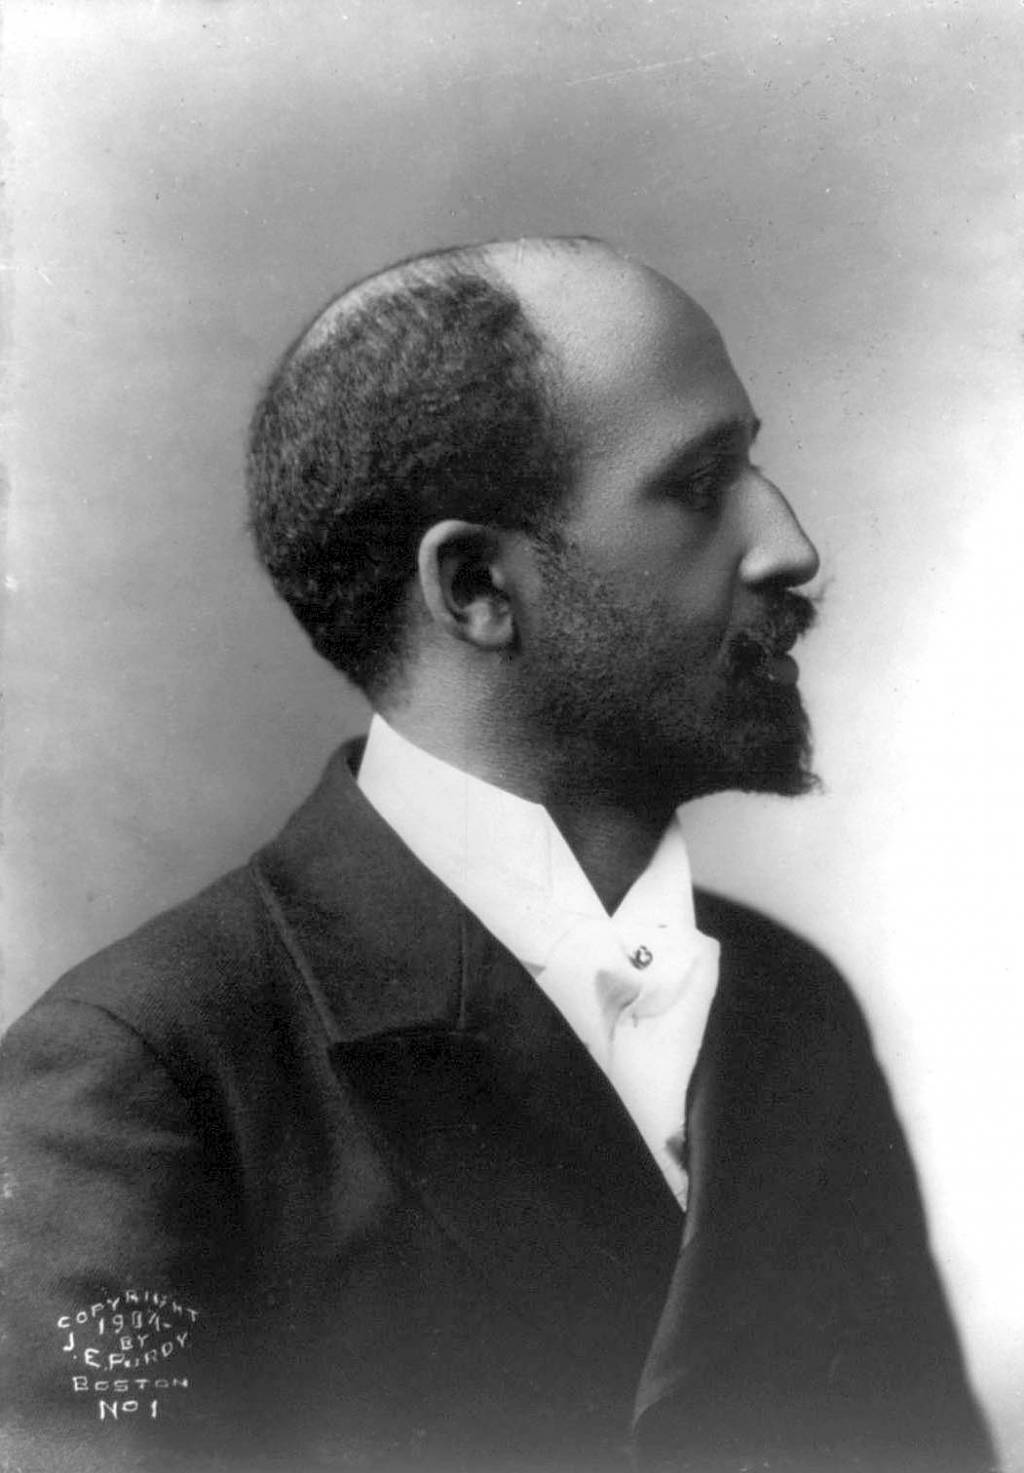 Comparing and contrasting the ideas of W.E.B. Du Bois and Booker T